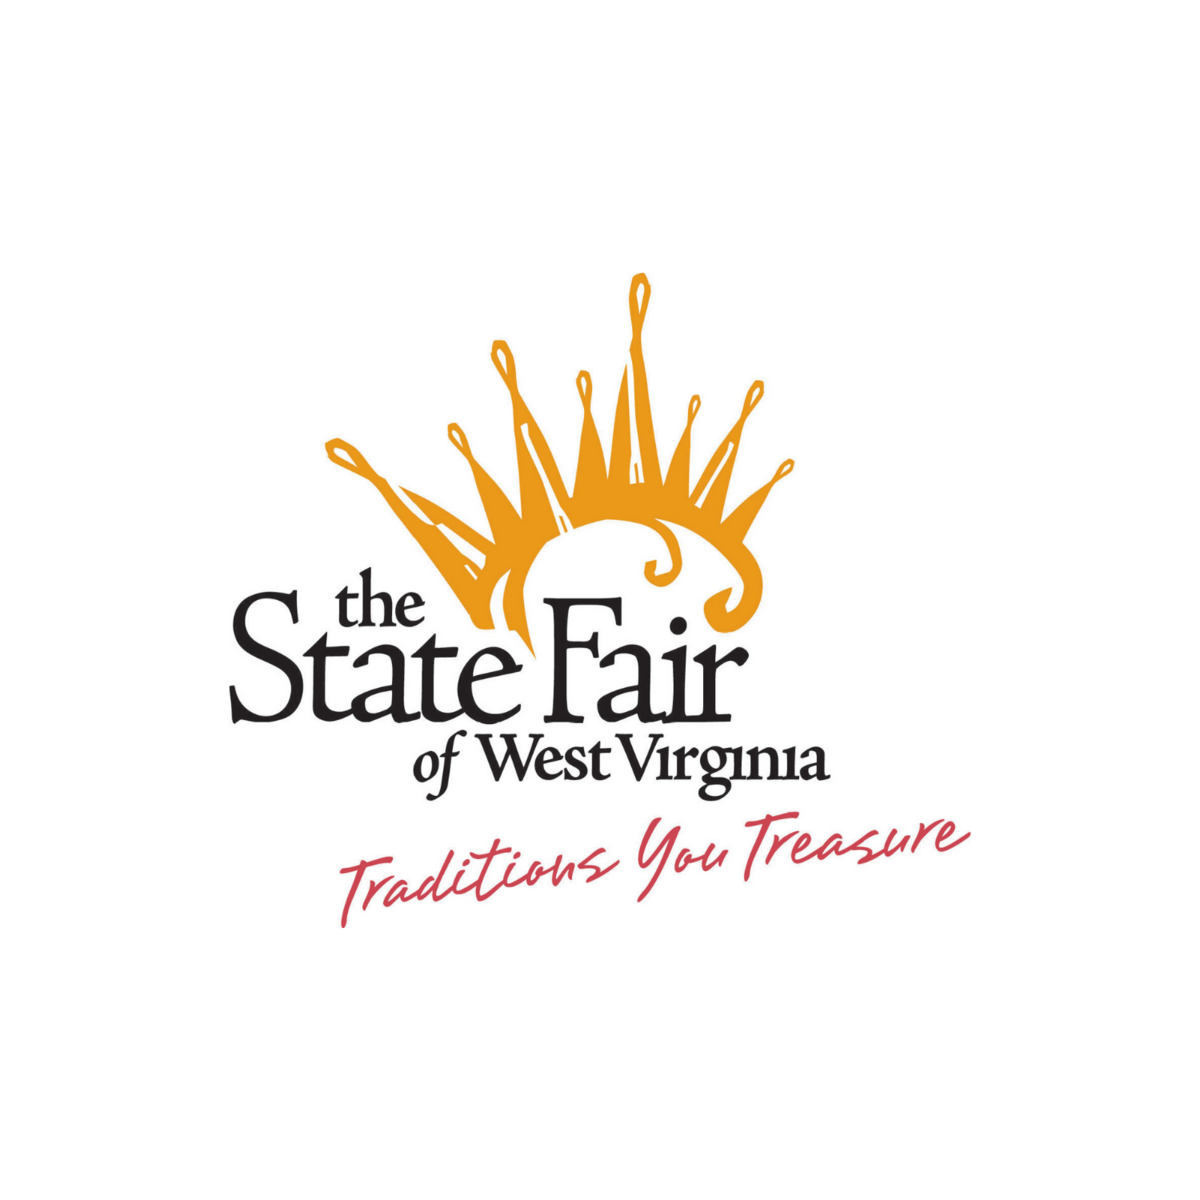 The State Fair of West Virginia